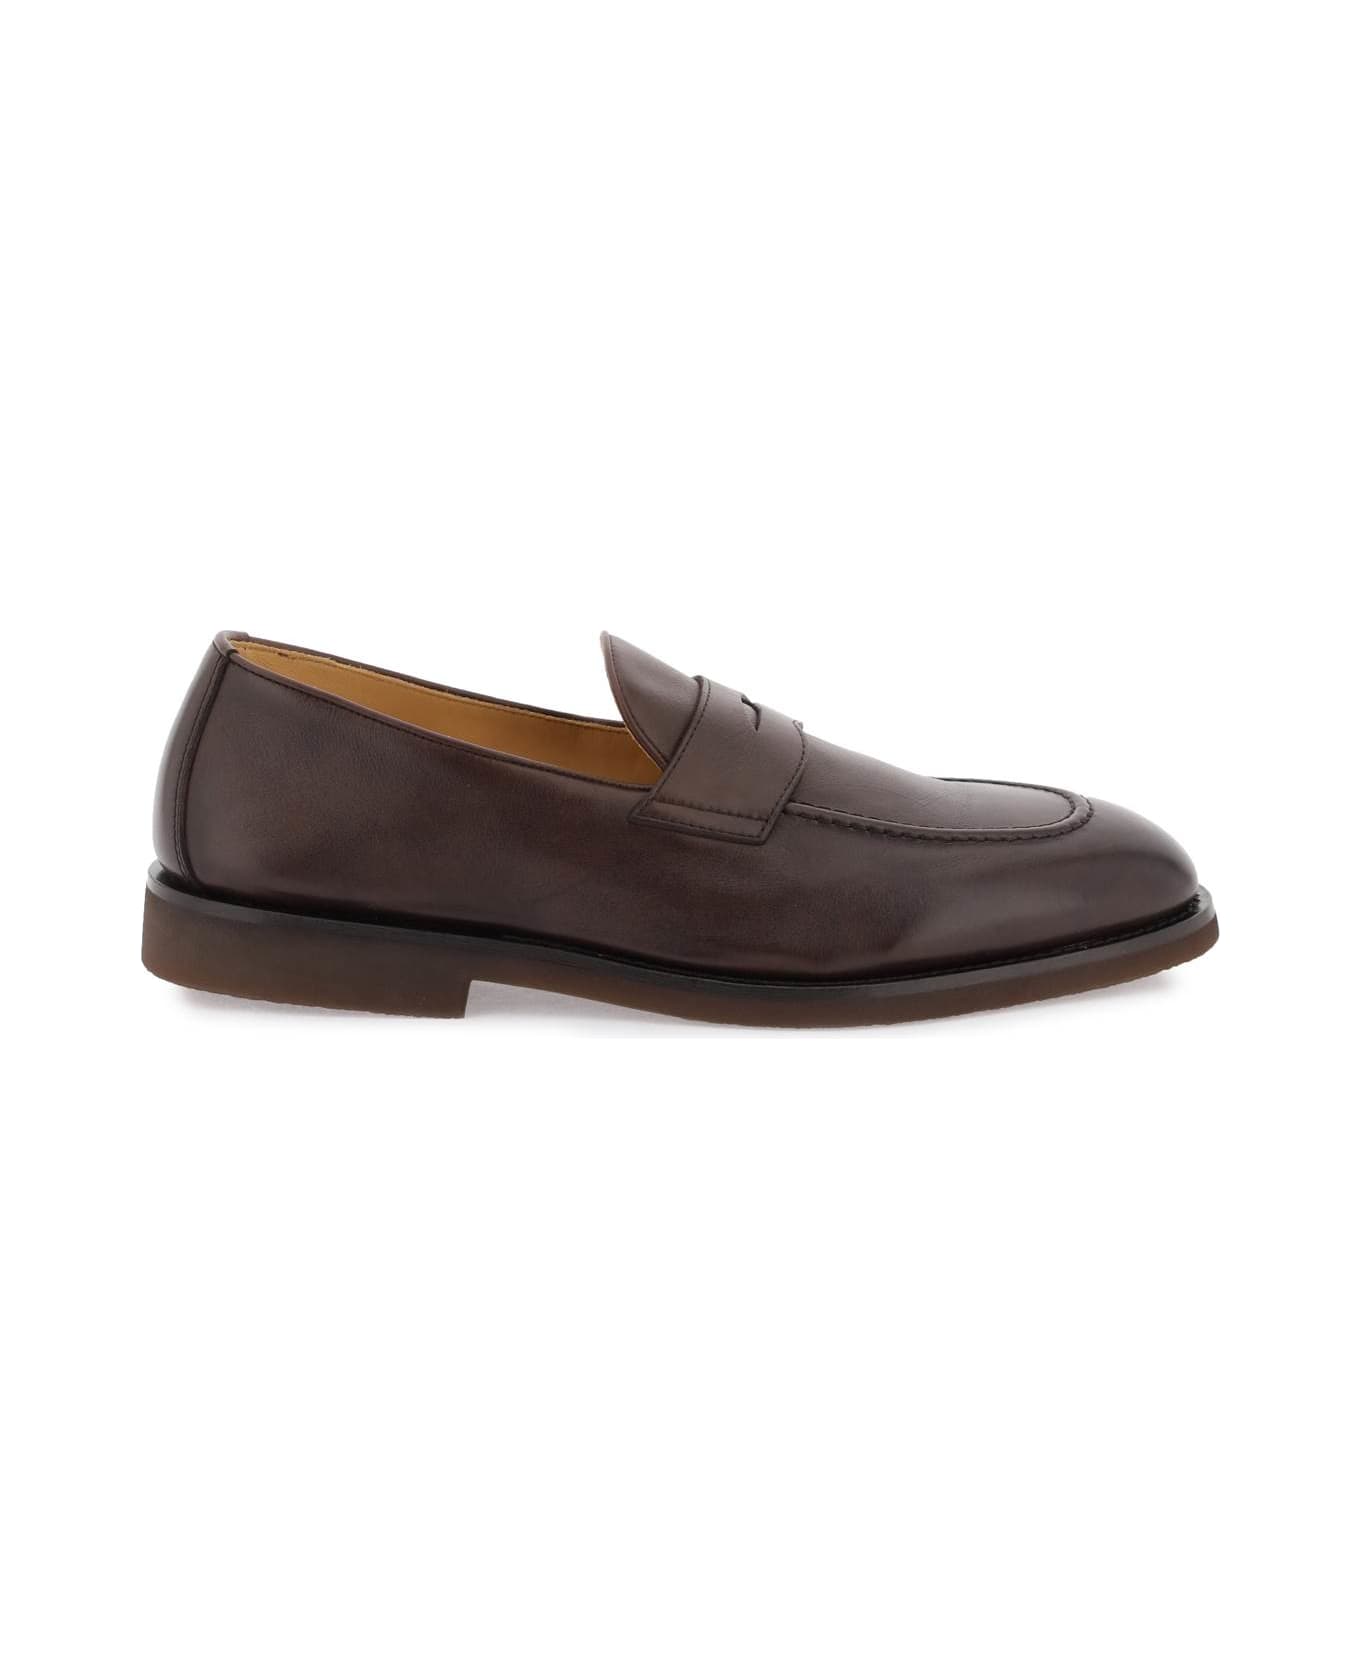 Brunello Cucinelli Leather Penny Loafers - ESPRESSO (Brown) ローファー＆デッキシューズ